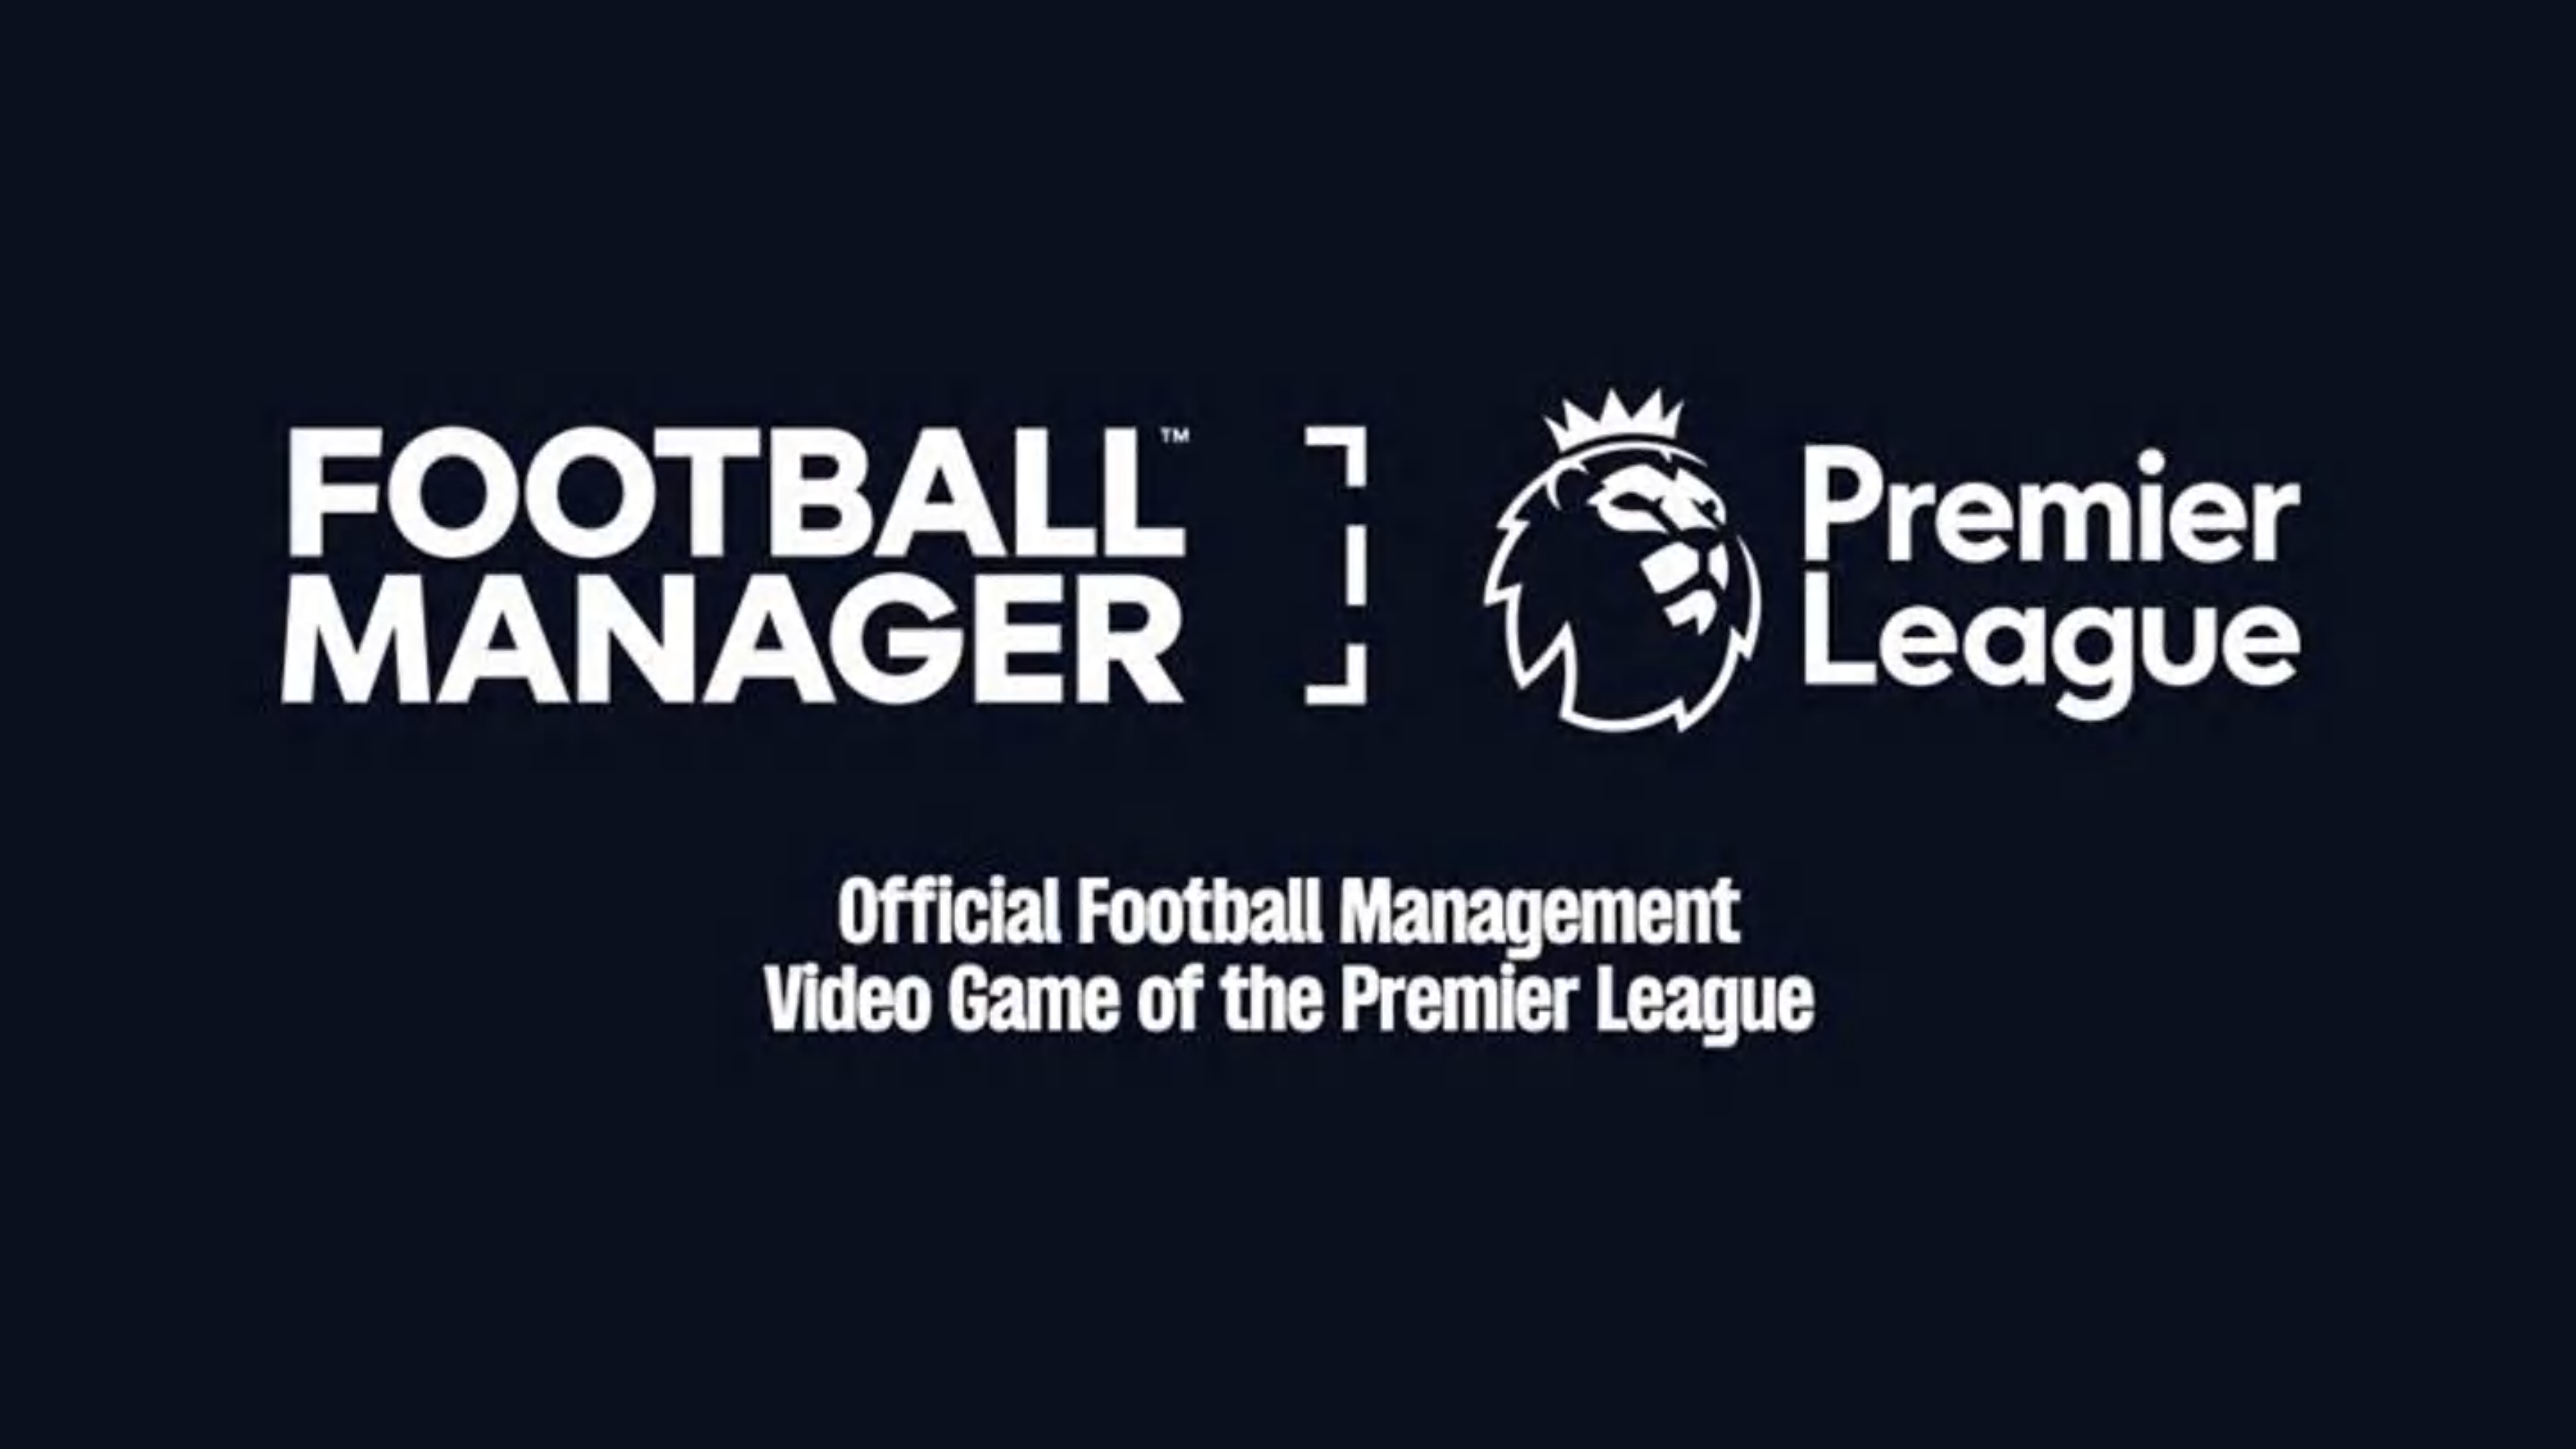 Premier League to be fully licensed in Football Manager